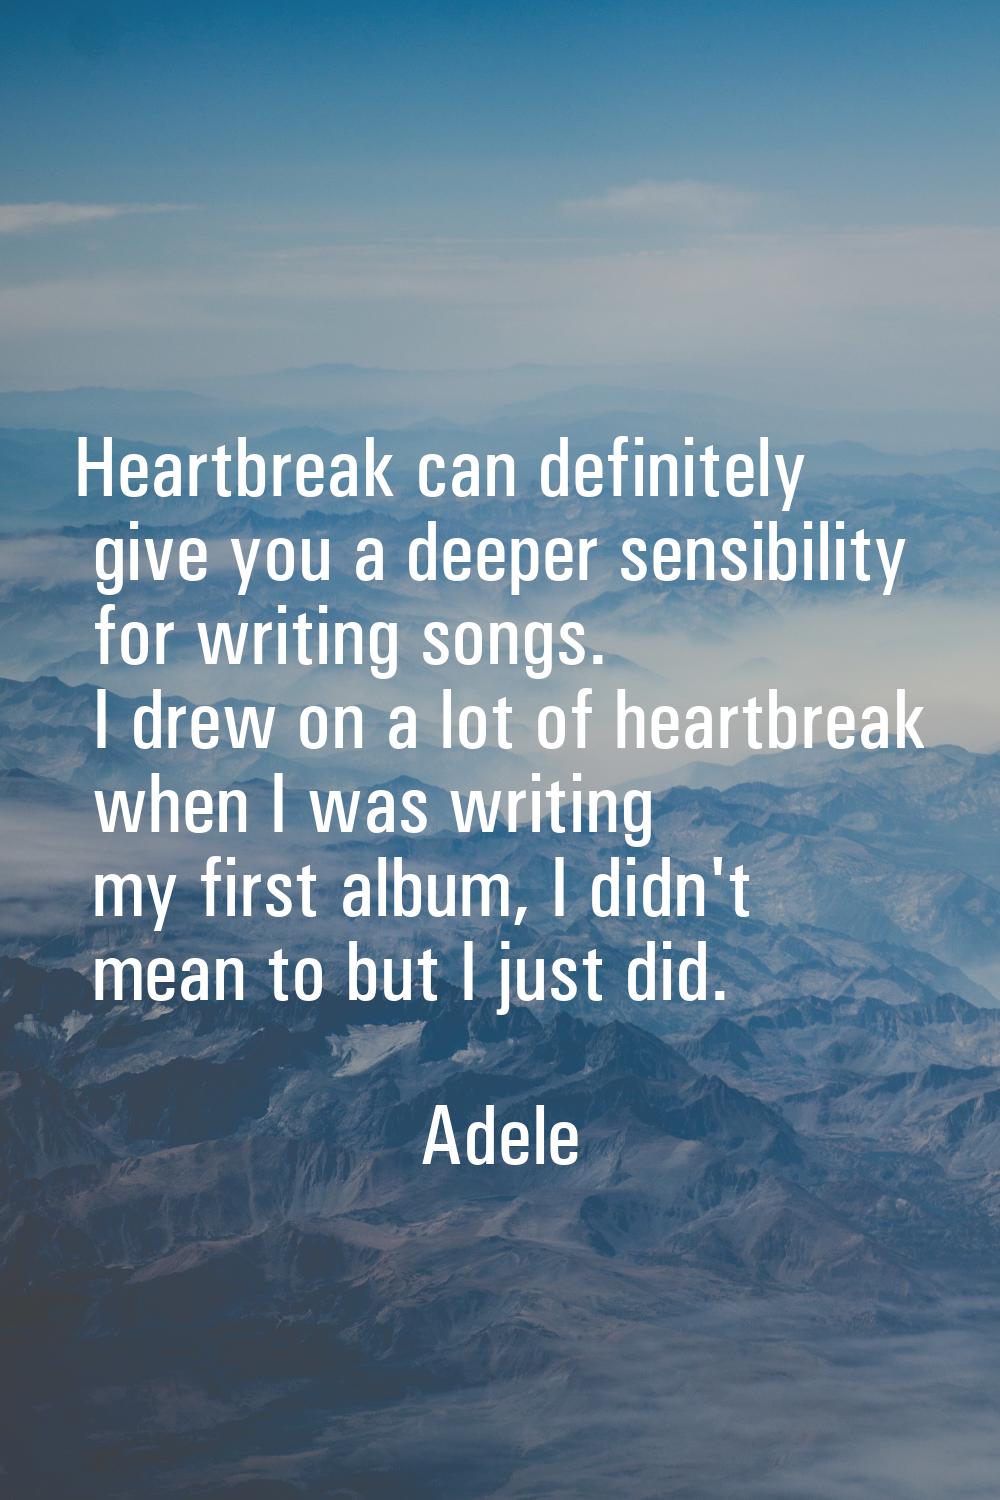 Heartbreak can definitely give you a deeper sensibility for writing songs. I drew on a lot of heart